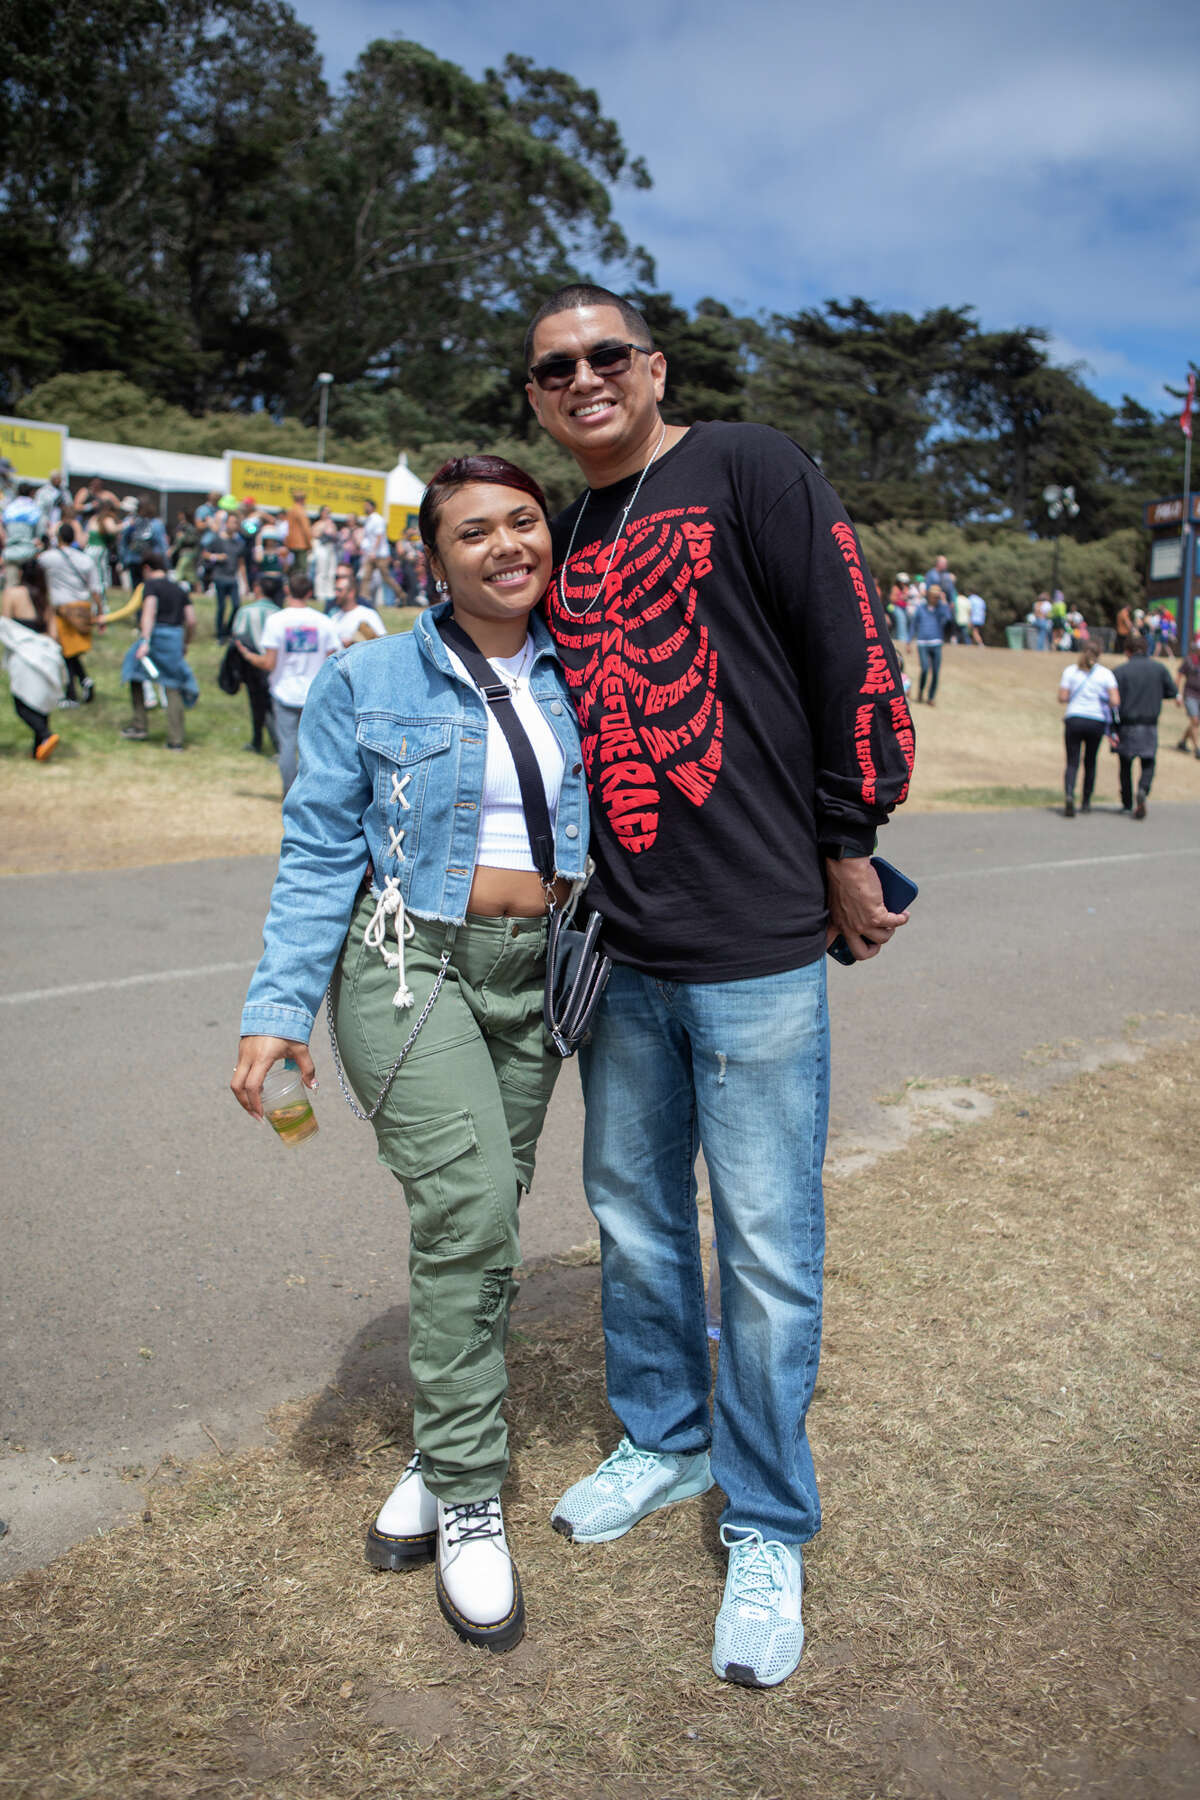 (Left to right) Ariana Arguijo and Adrian Jackson at Outside Lands in Golden Gate Park in San Francisco, Calif. on Aug. 6, 2022.